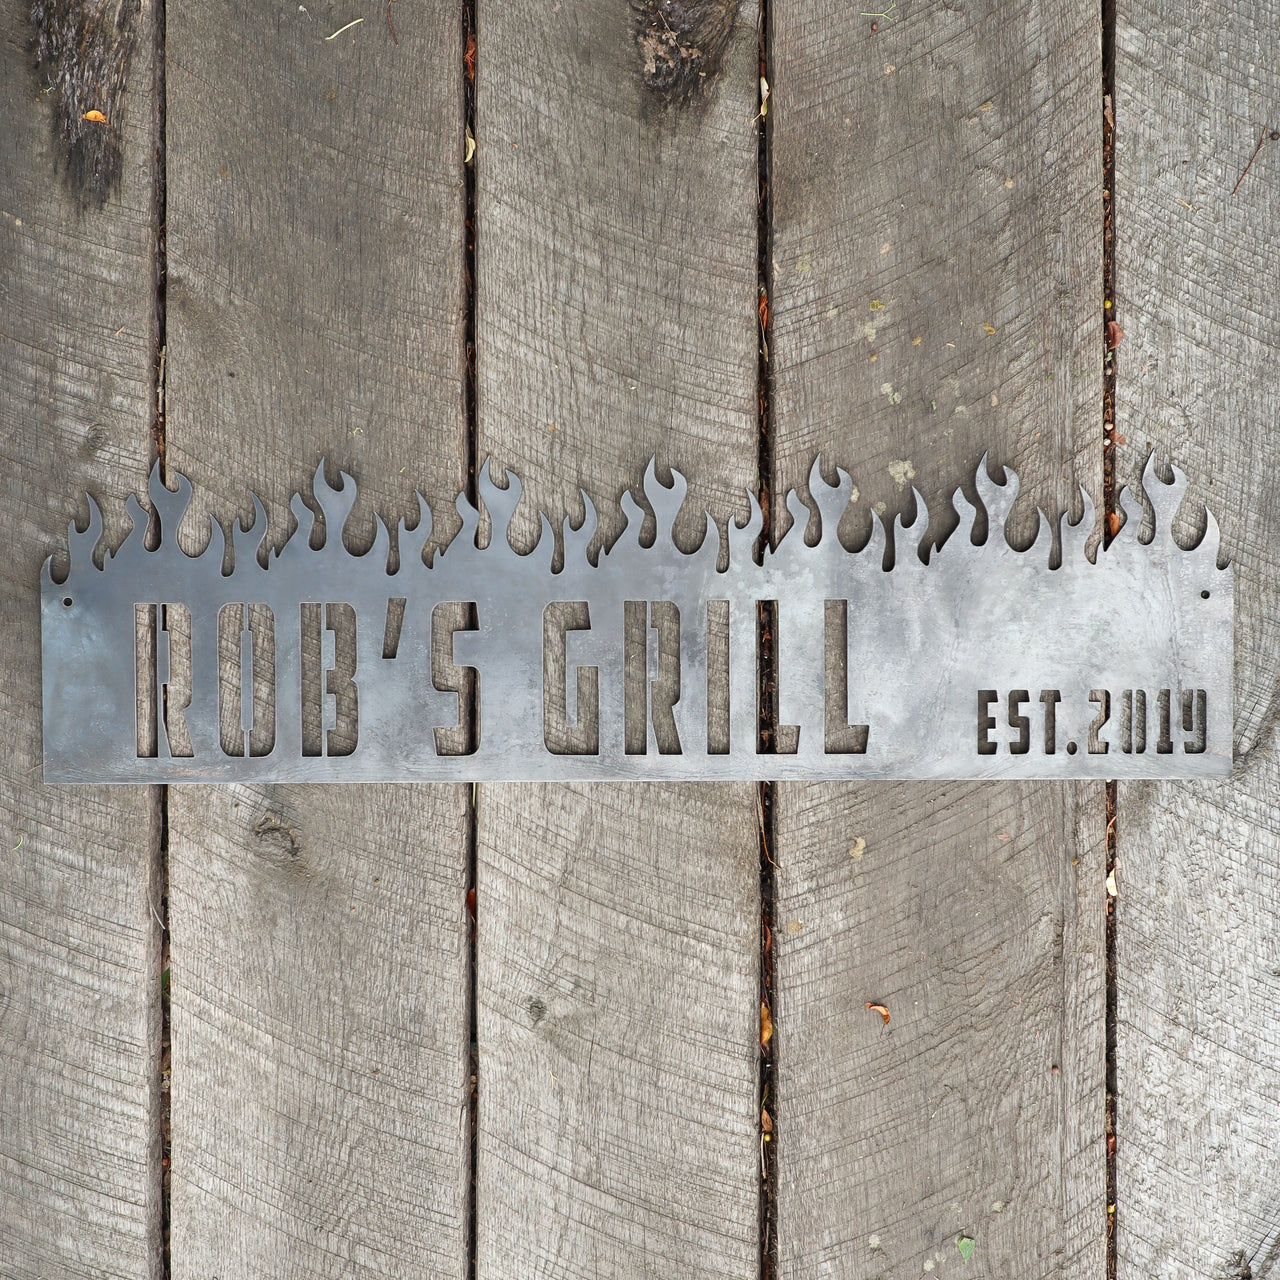 Personal Grill BBQ Metal Sign - Father's Day - Personalized Barbeque, Barbecue, Smoker Decor - Green Egg, Traeger Established Date